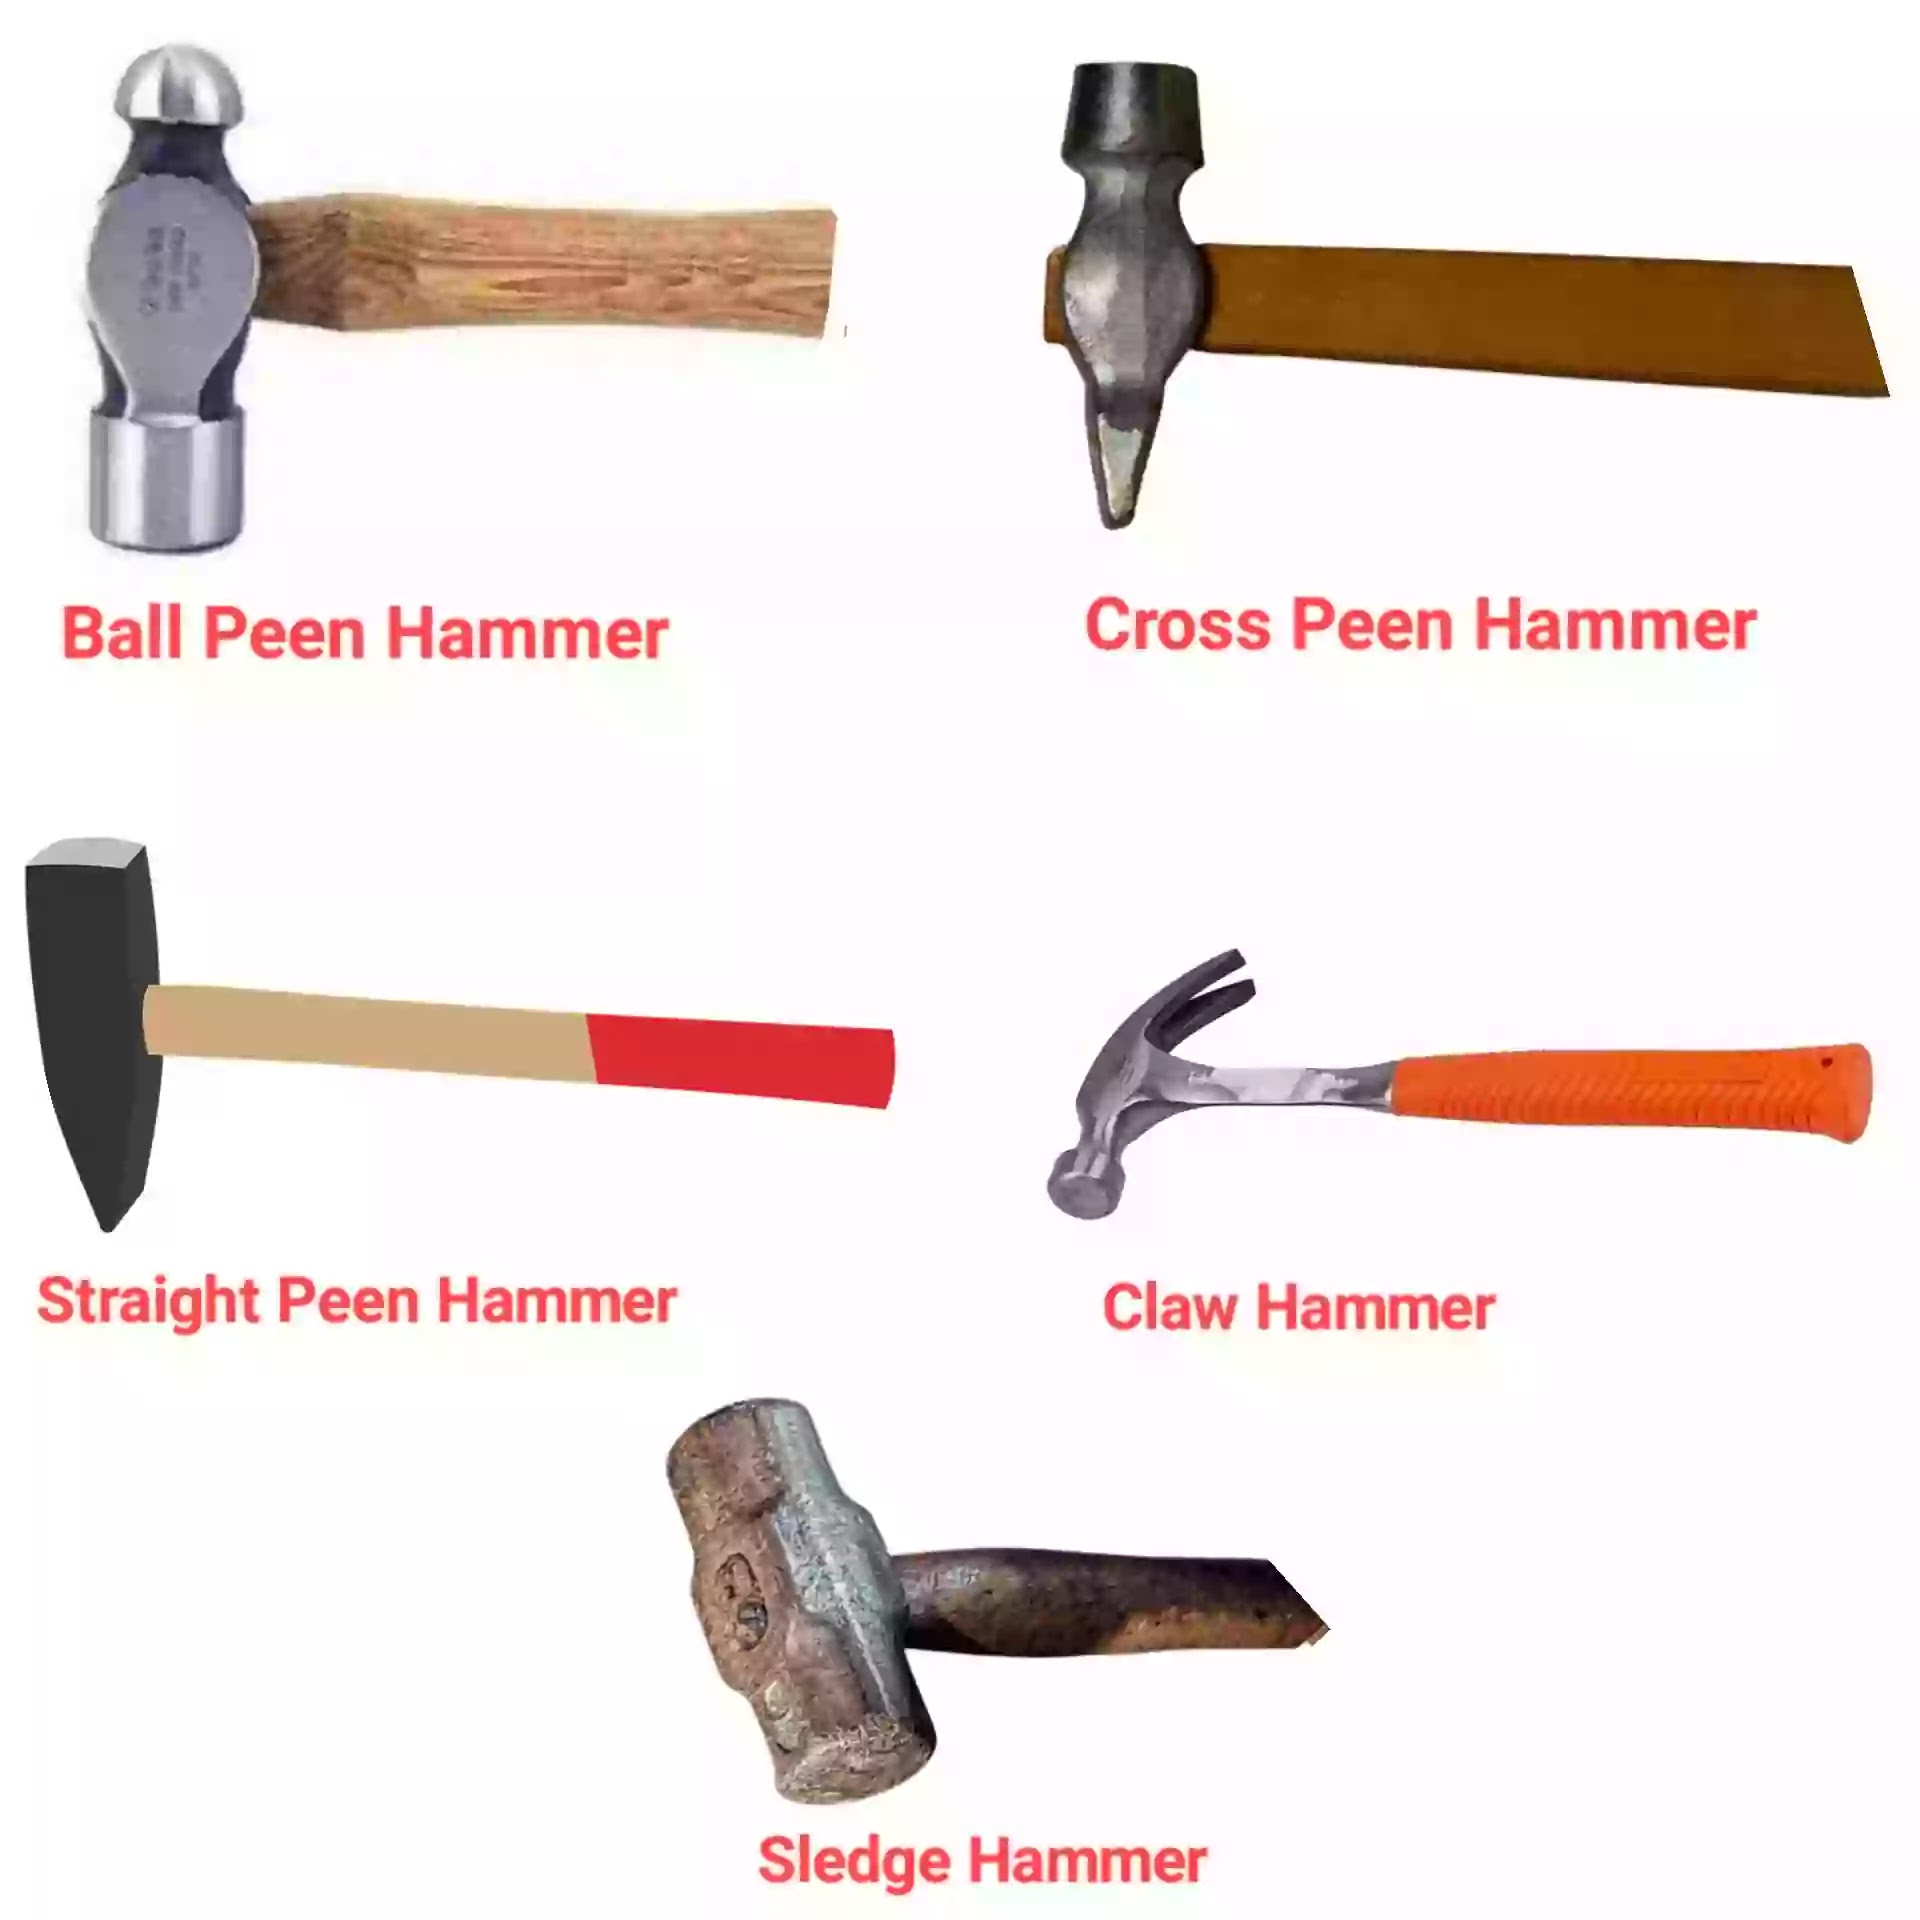 Types of Hammers and Hammers